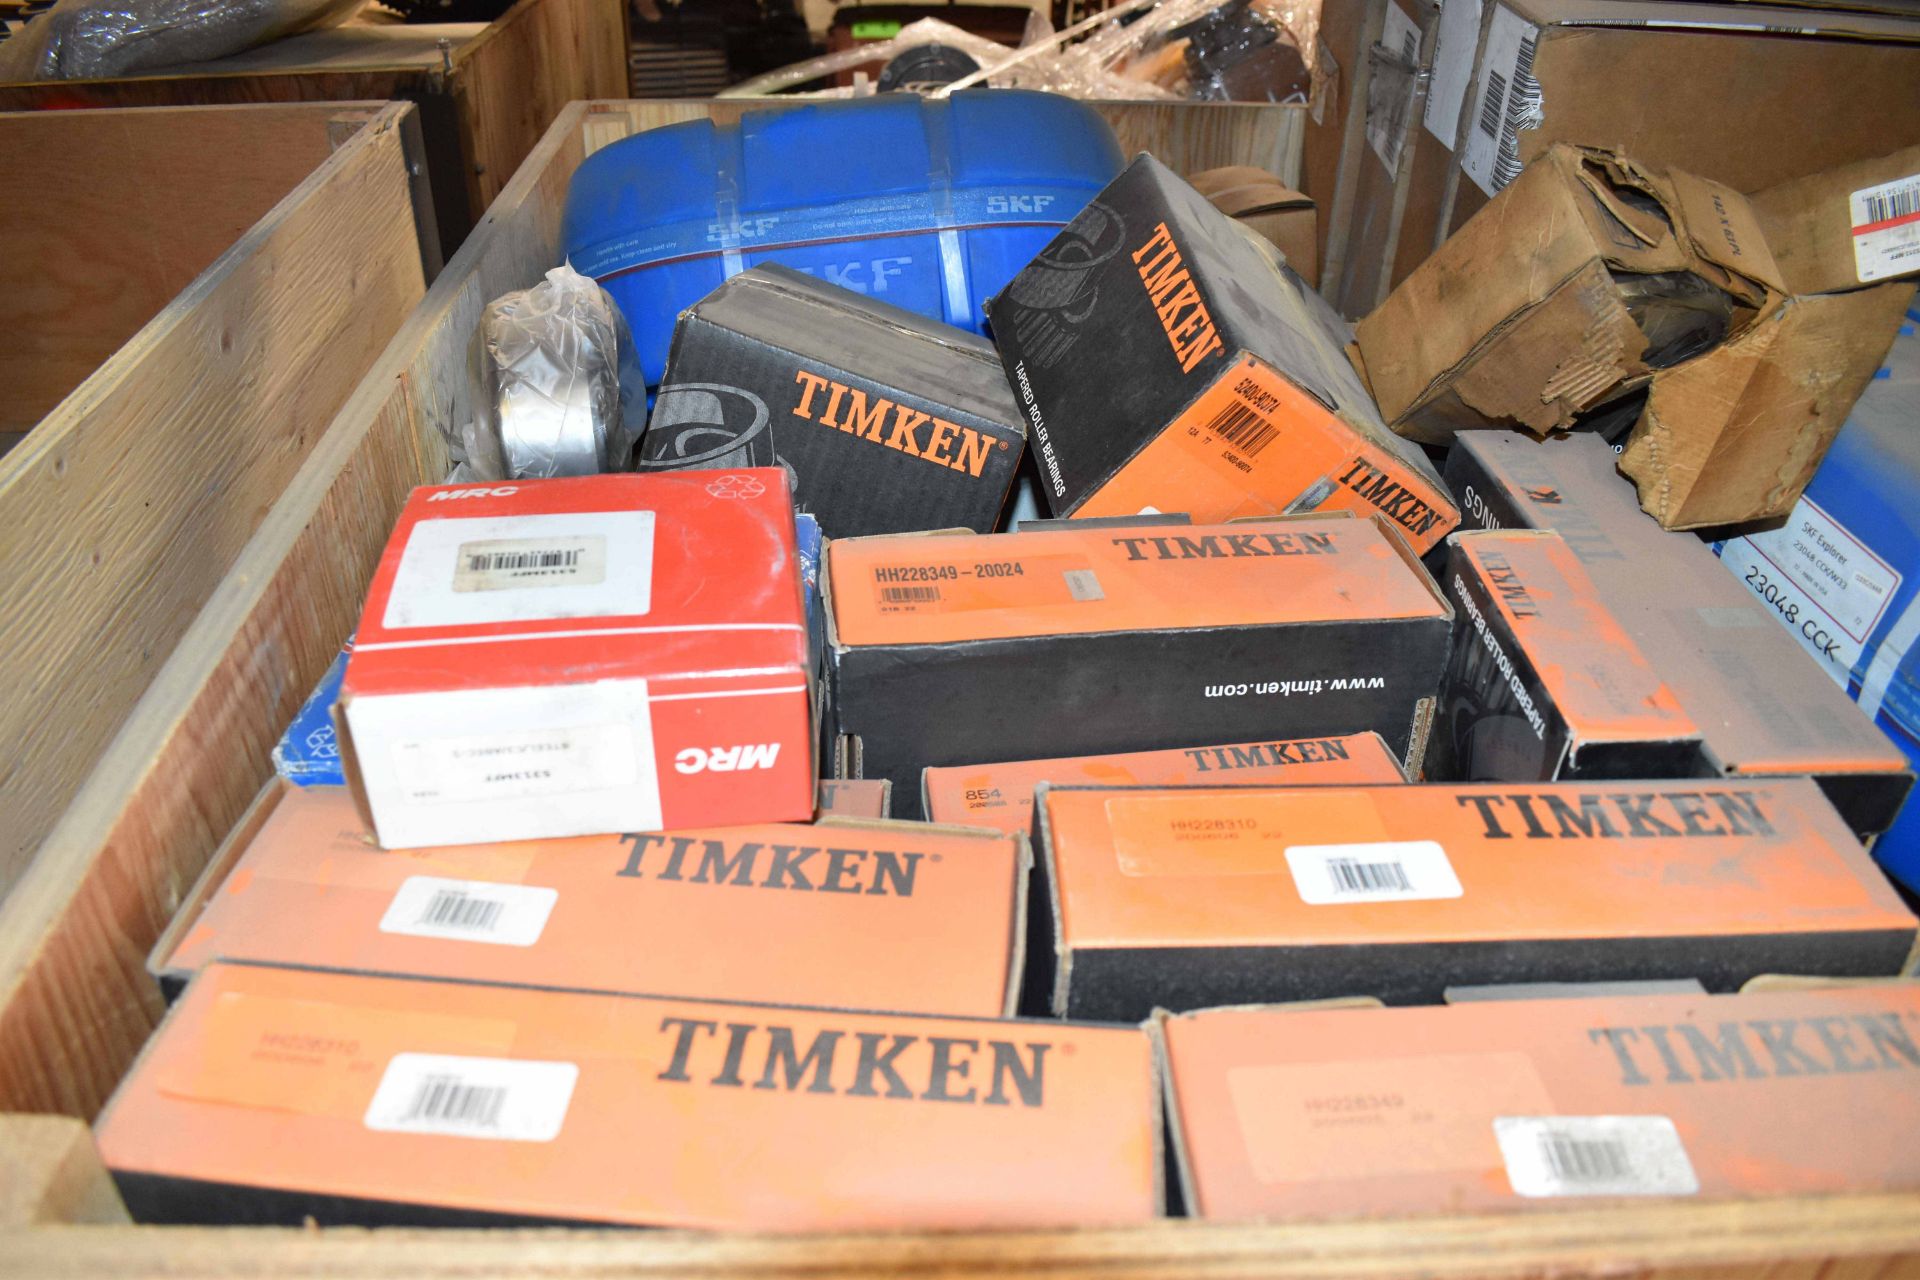 LOT/ CRATE WITH TIMKEN & SKG BEARINGS (CMD WAREHOUSE - 08020201) - Image 2 of 3